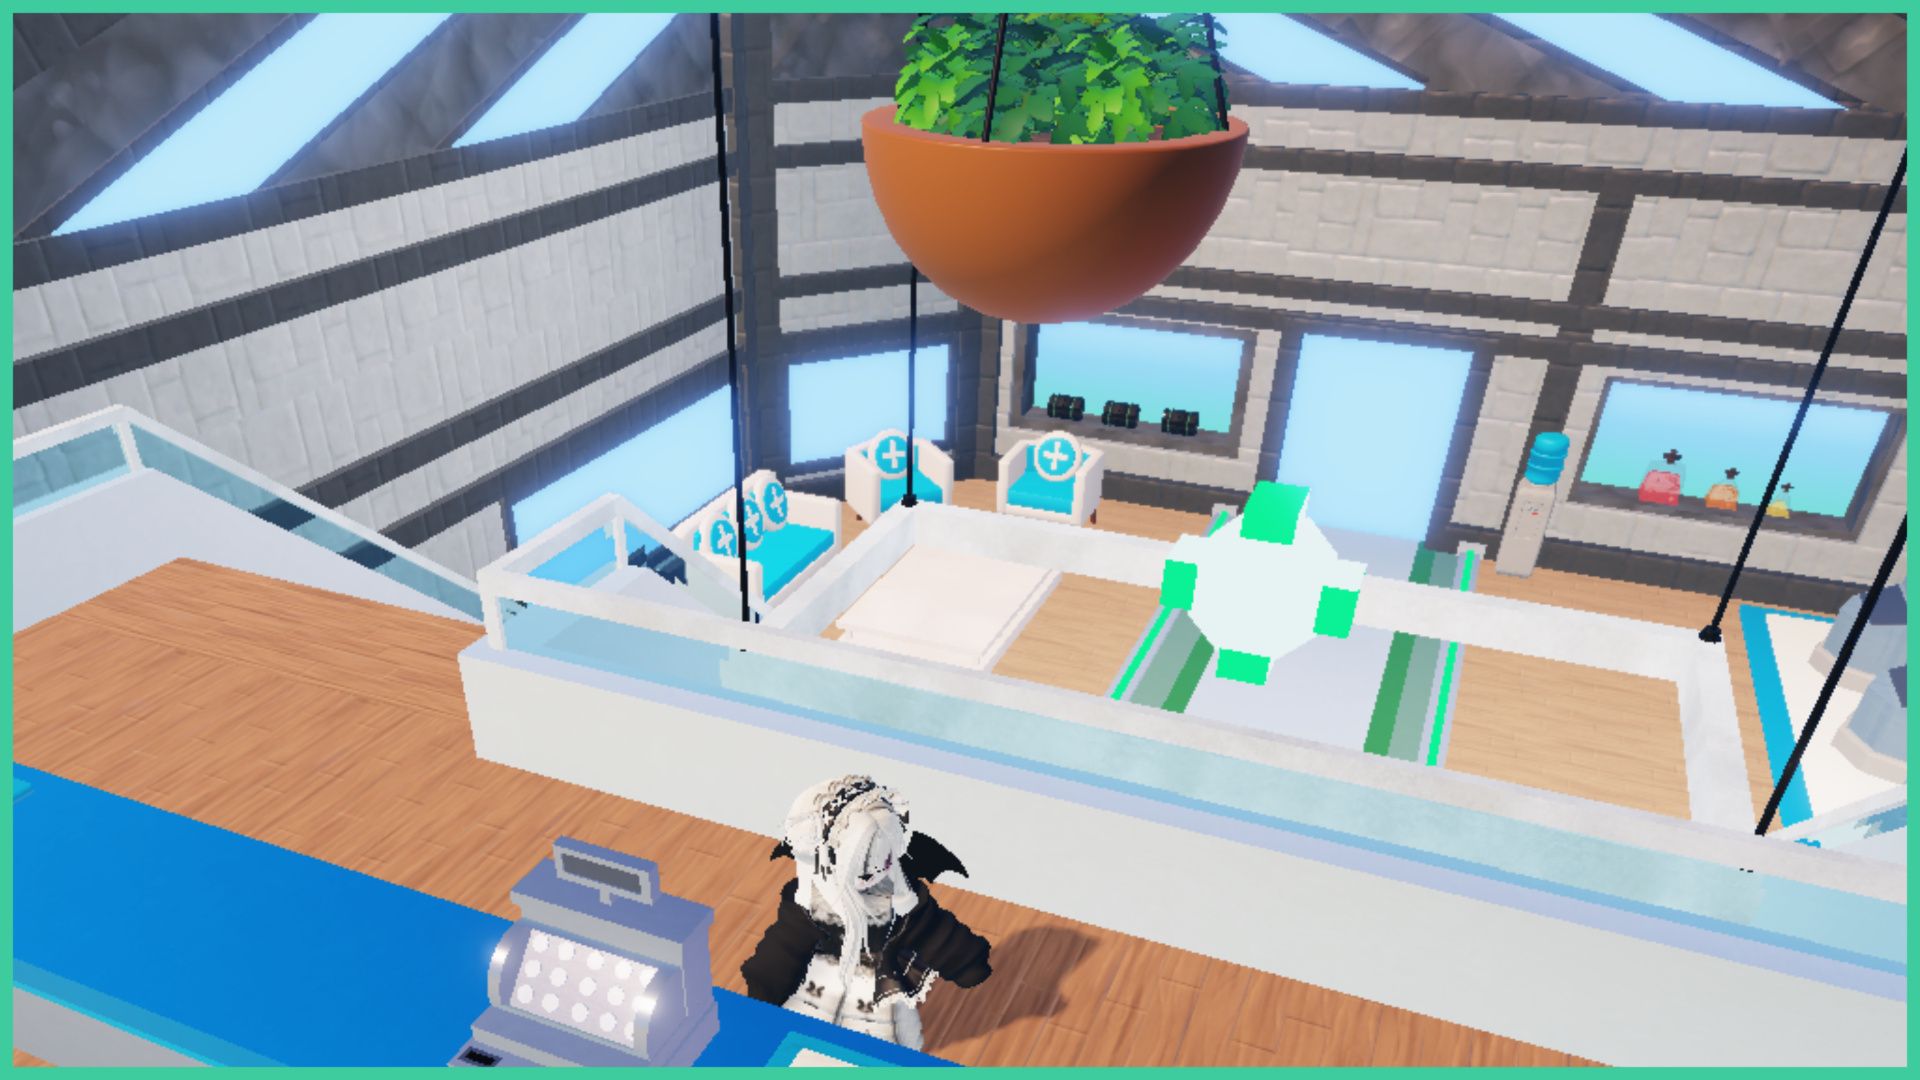 feature image for our tales of tanorio spring hunt event guide. it's a screenshot from inside the tanostation on the top floor as a roblox player stands at a reception desk with a till on the desk, as a hanging plant is suspended from the ceiling, there is seating downstairs close by to the door